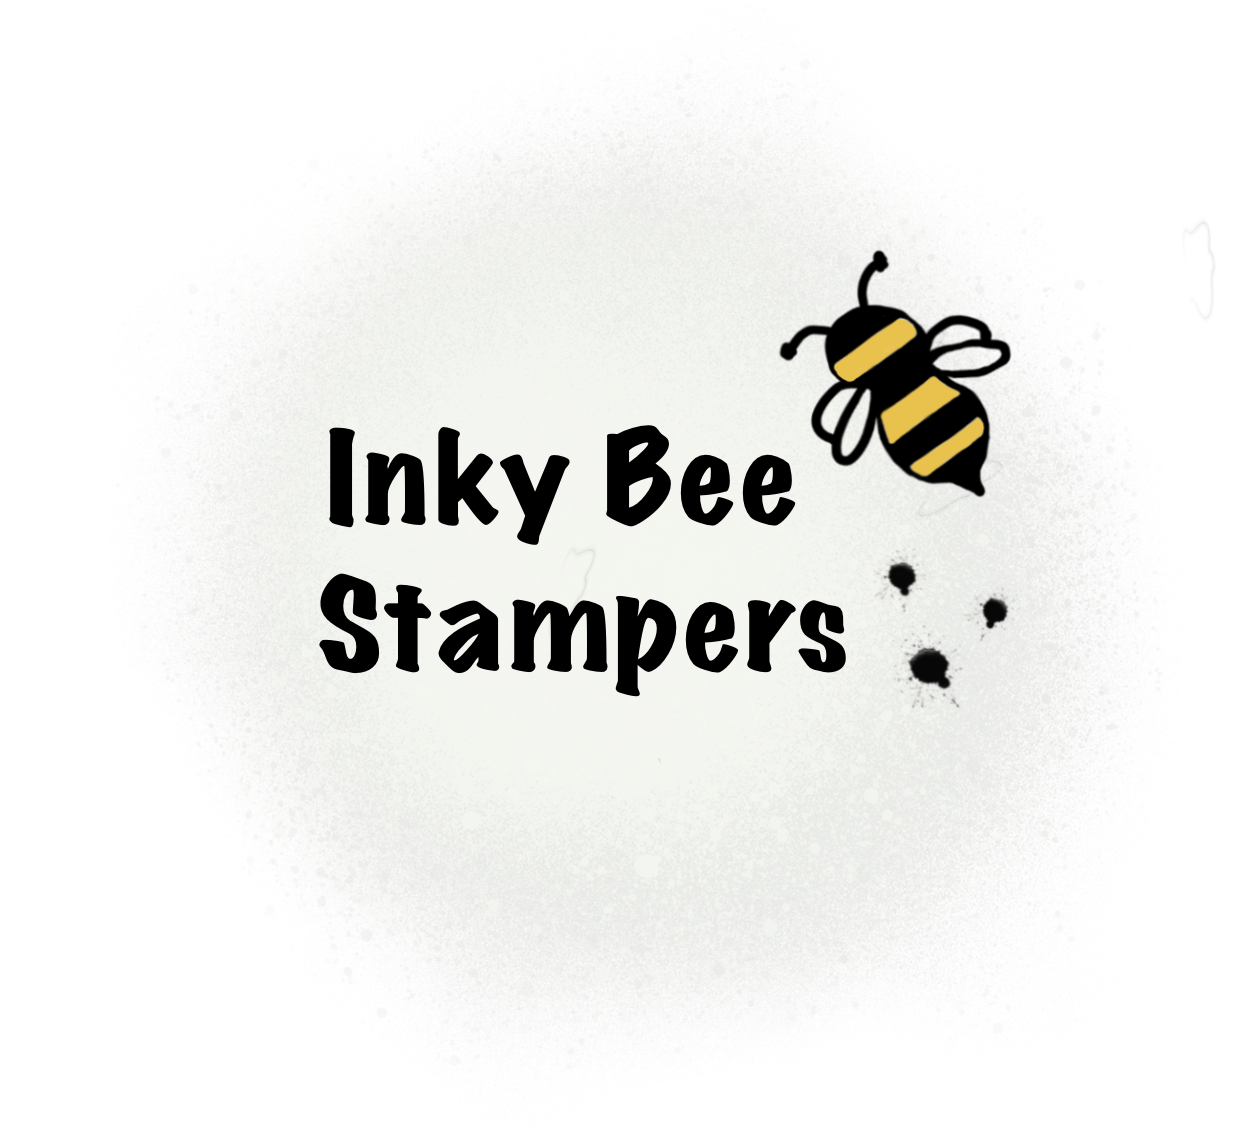 Inky Bee Stampers